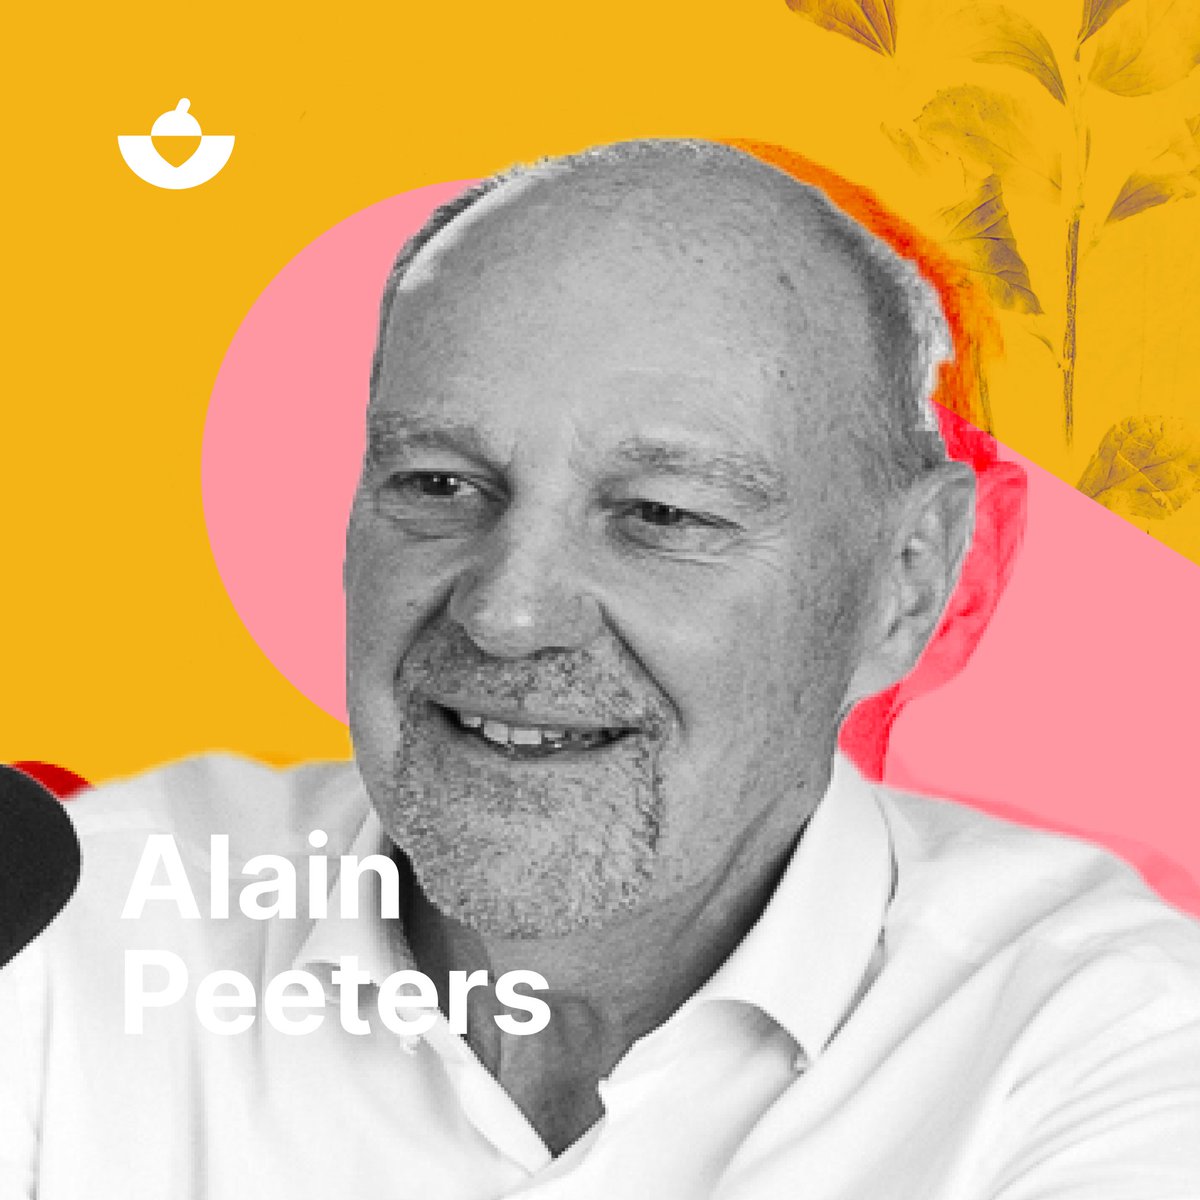 🌱 New Deep Seed episode out now!

Meet Alain Peeters, a pioneer of #agroecology since the 70s. Learn how this holistic approach can transform our #foodsystem from destructive to #regenerative while improving farmer wellbeing.

🔊[hubs.la/Q02w7zz-0]
#podcast #regenag